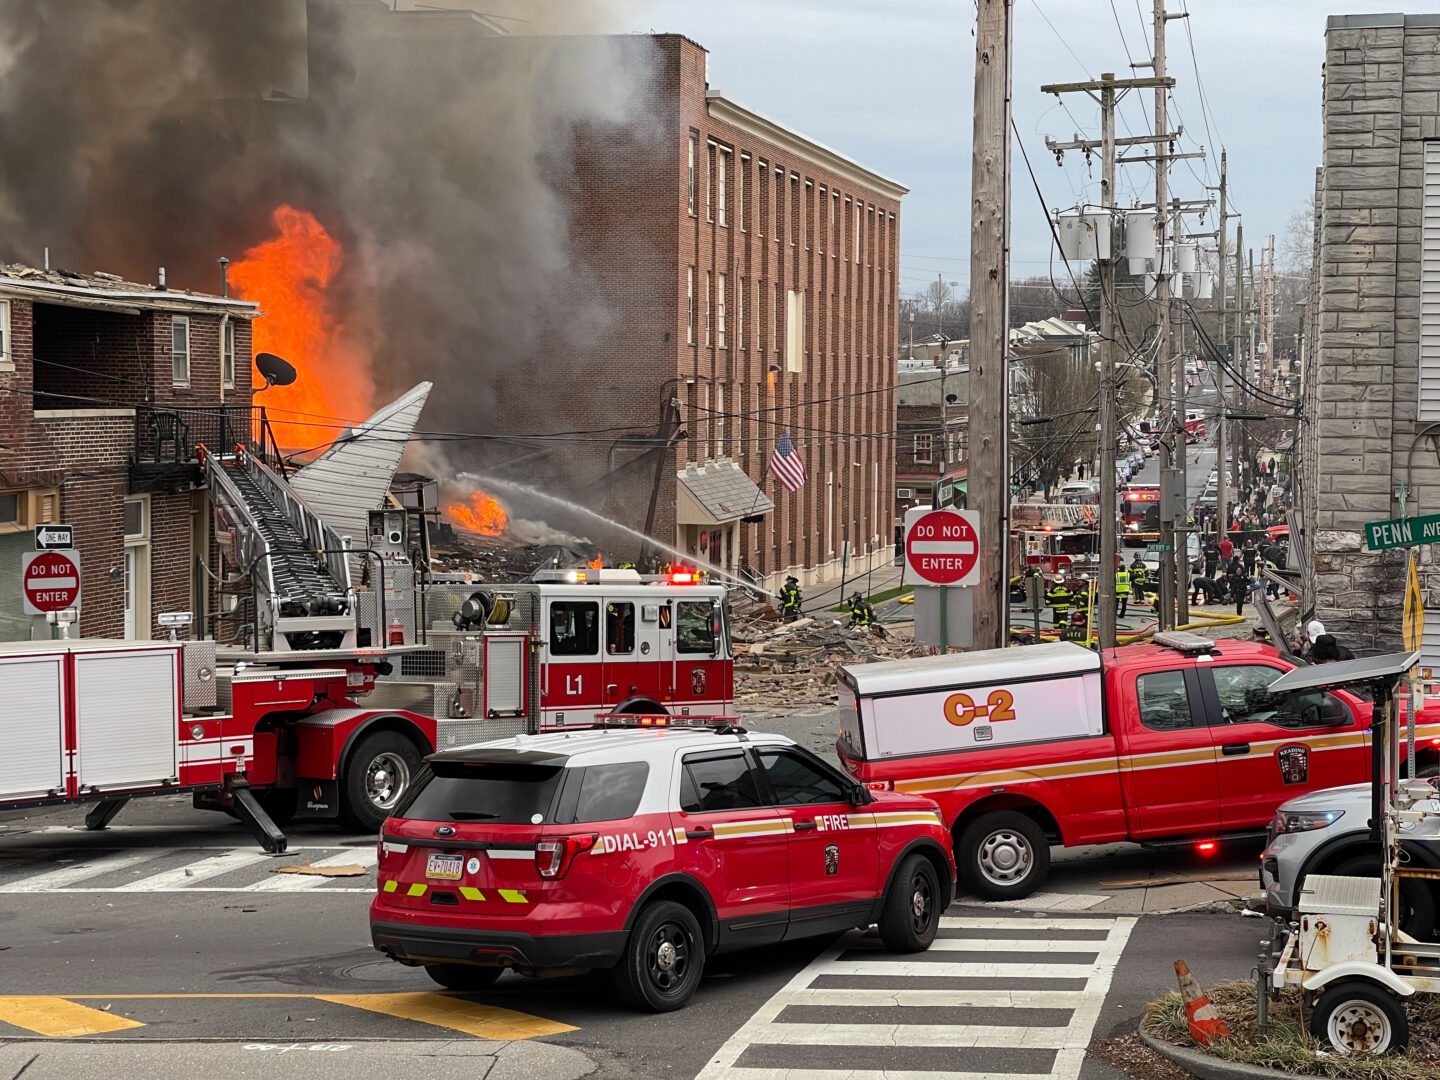 Emergency crews respond to R.M. Palmer Co. on March 24, 2023 after an explosion destroyed part of the candy factory. (Ben Hasty - in kind contribution)